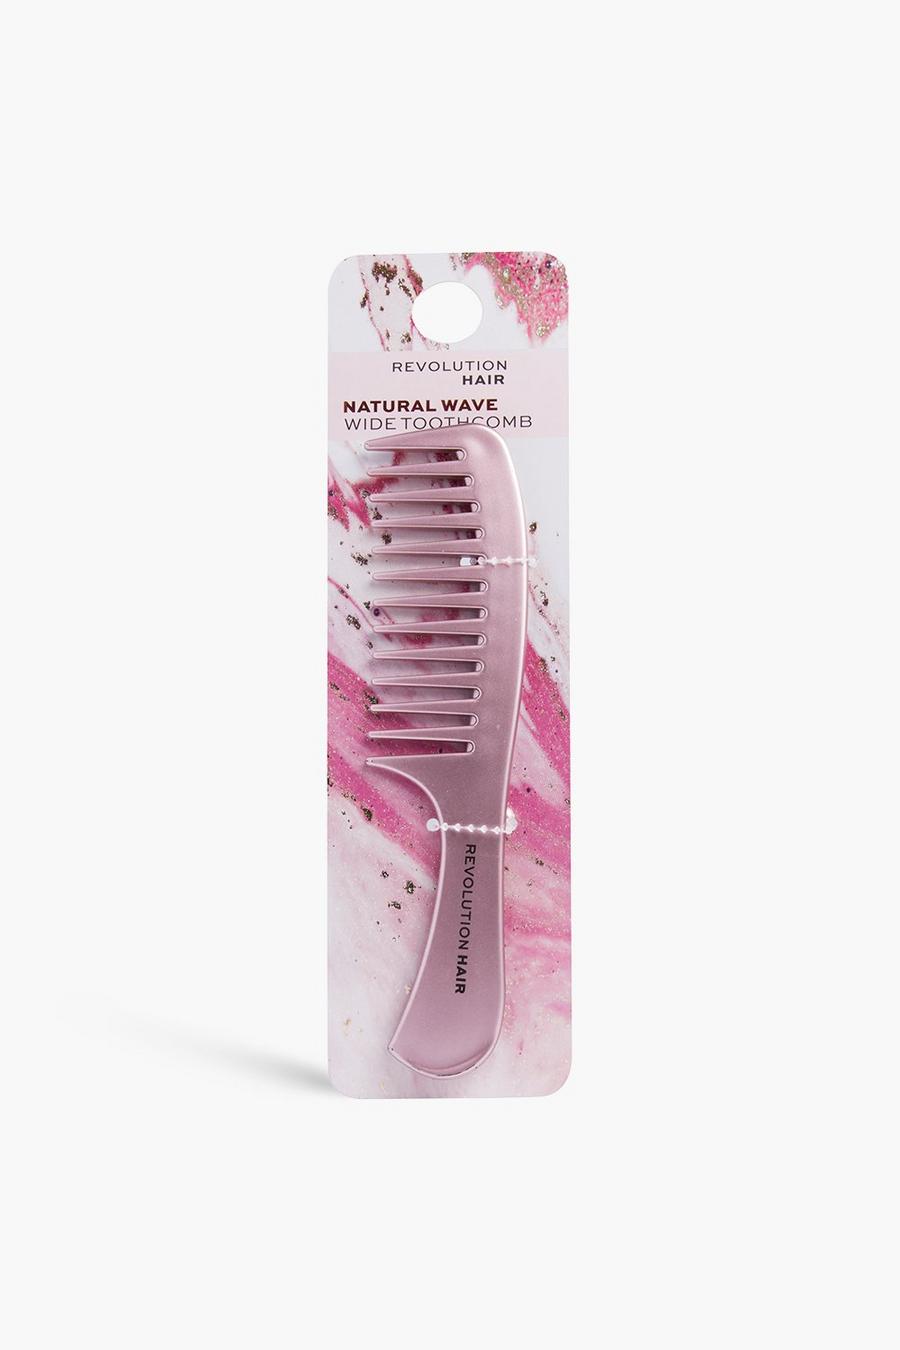 White Revolution Natural Wave Wide Toothcomb Vit kam